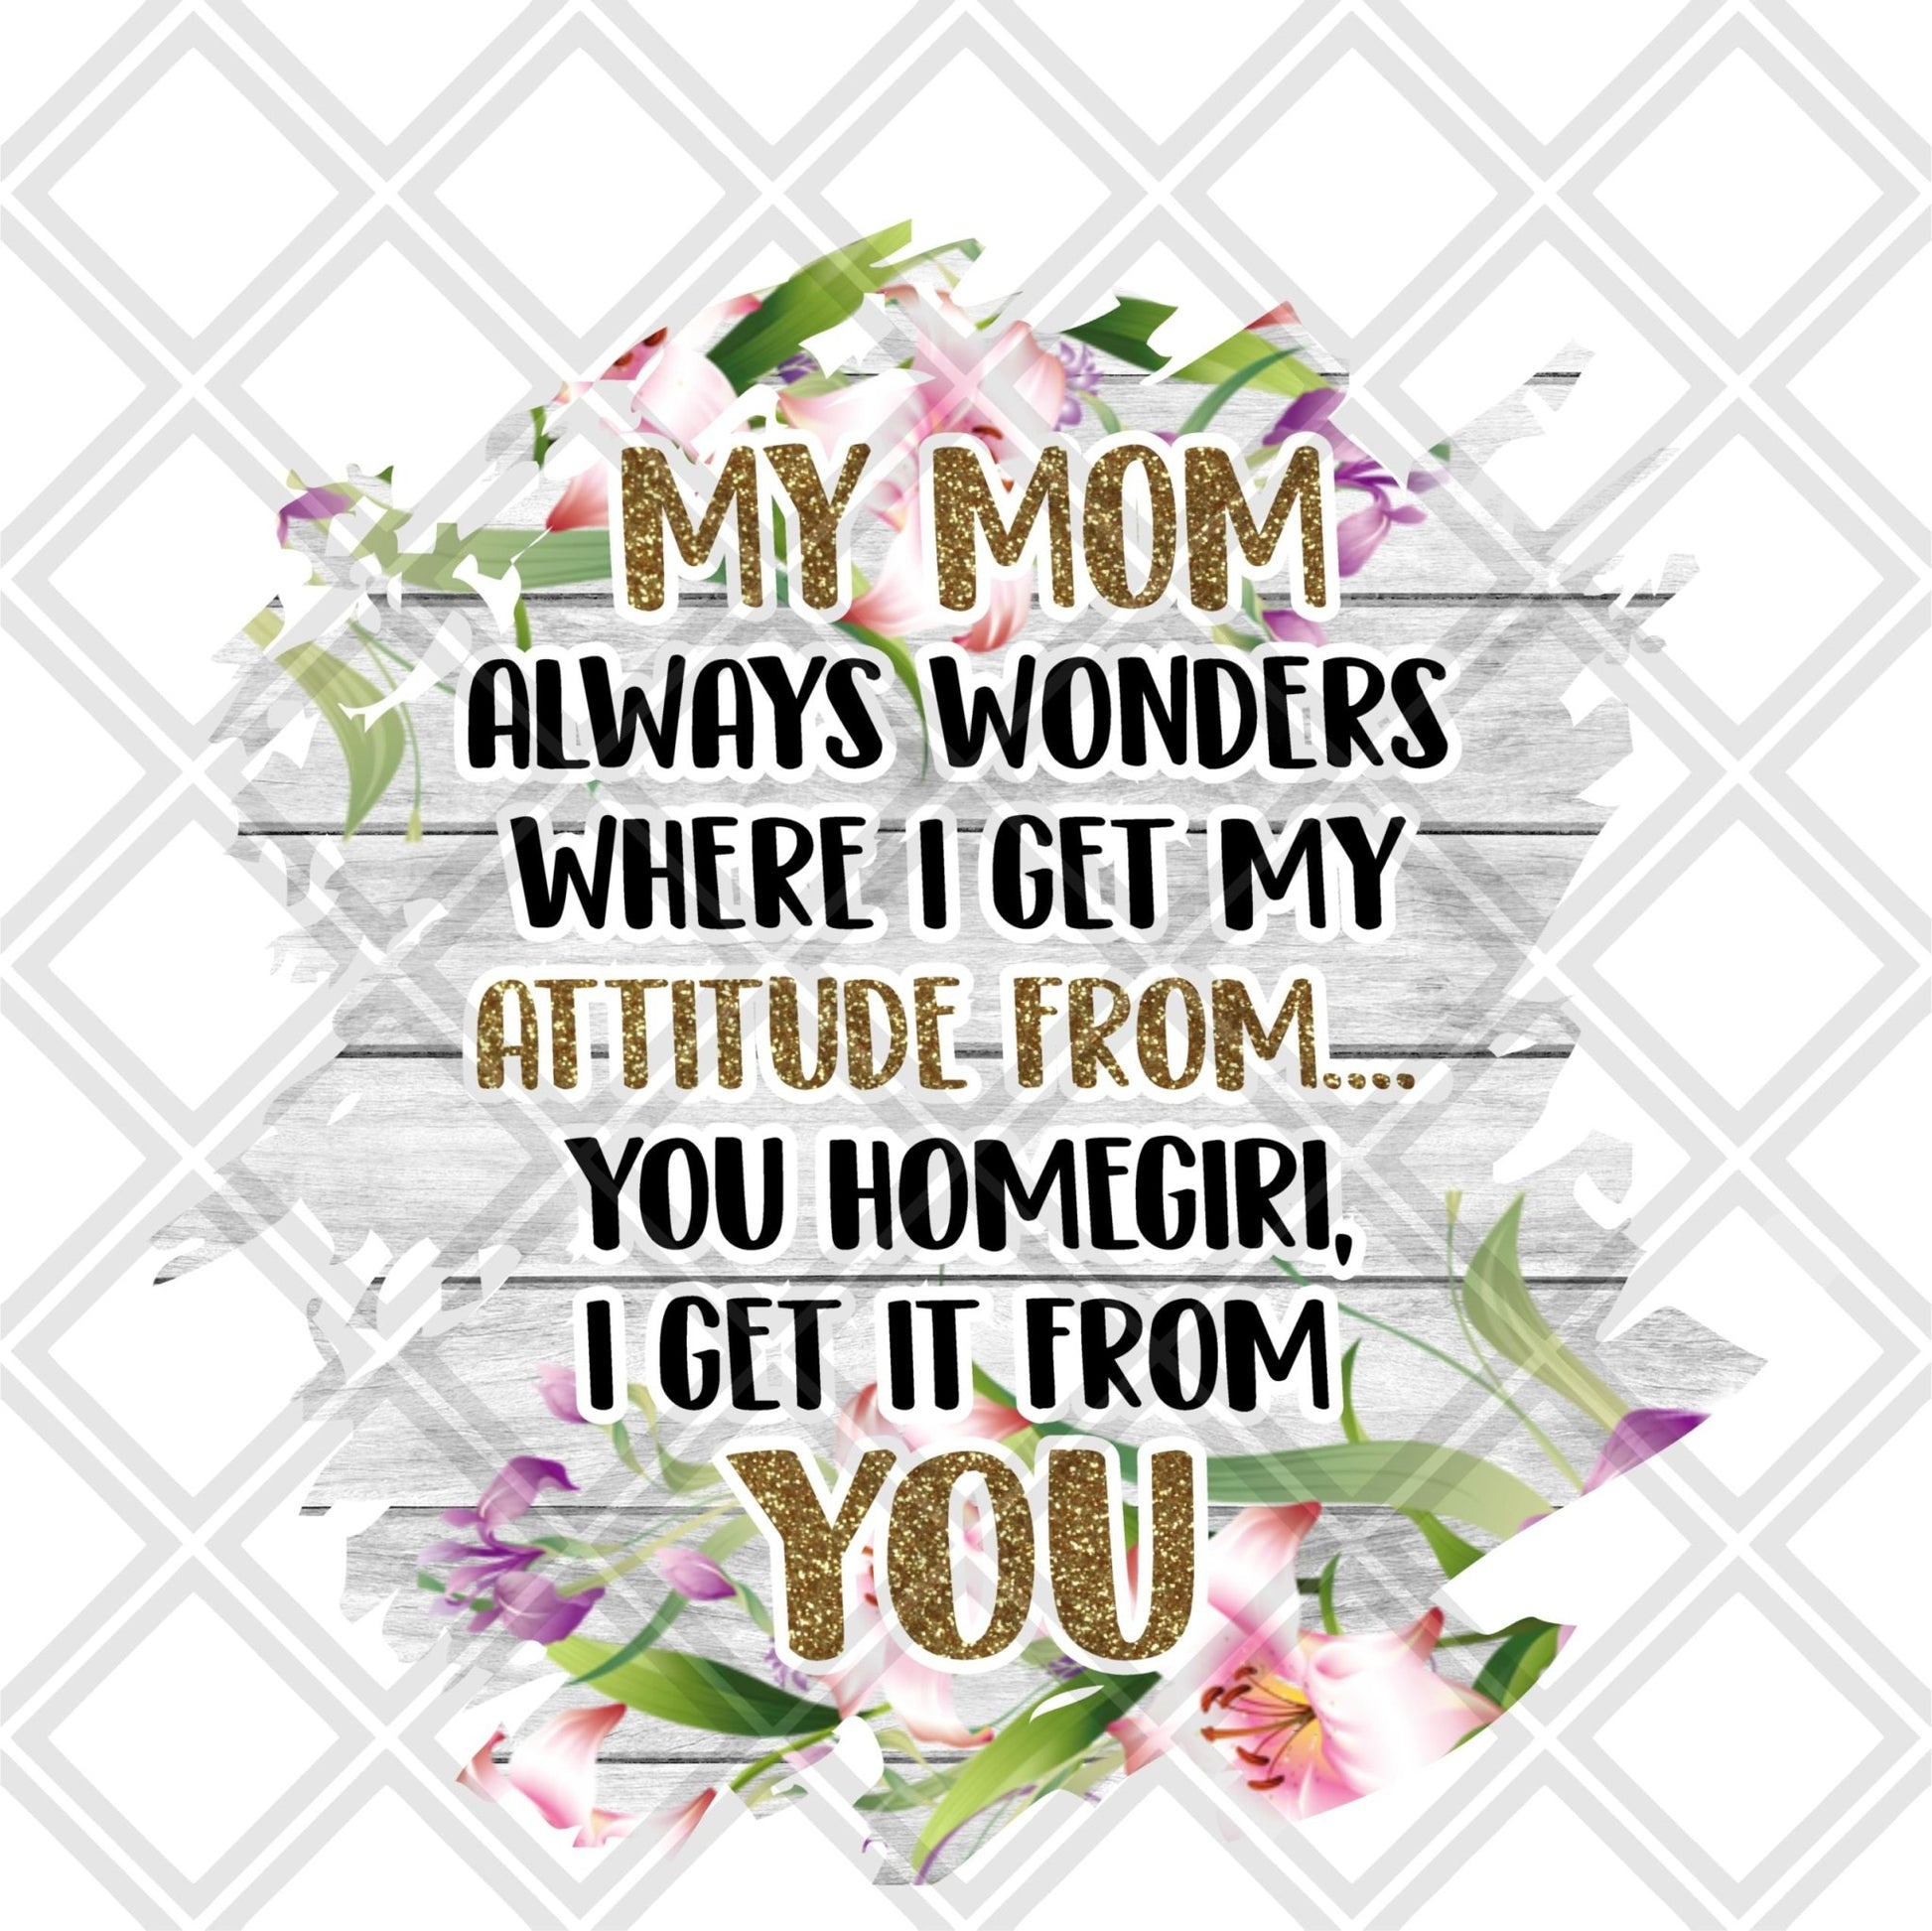 My Mom always wonders who i get my attitude from you home girl Digital Download Instand Download - Do it yourself Transfers